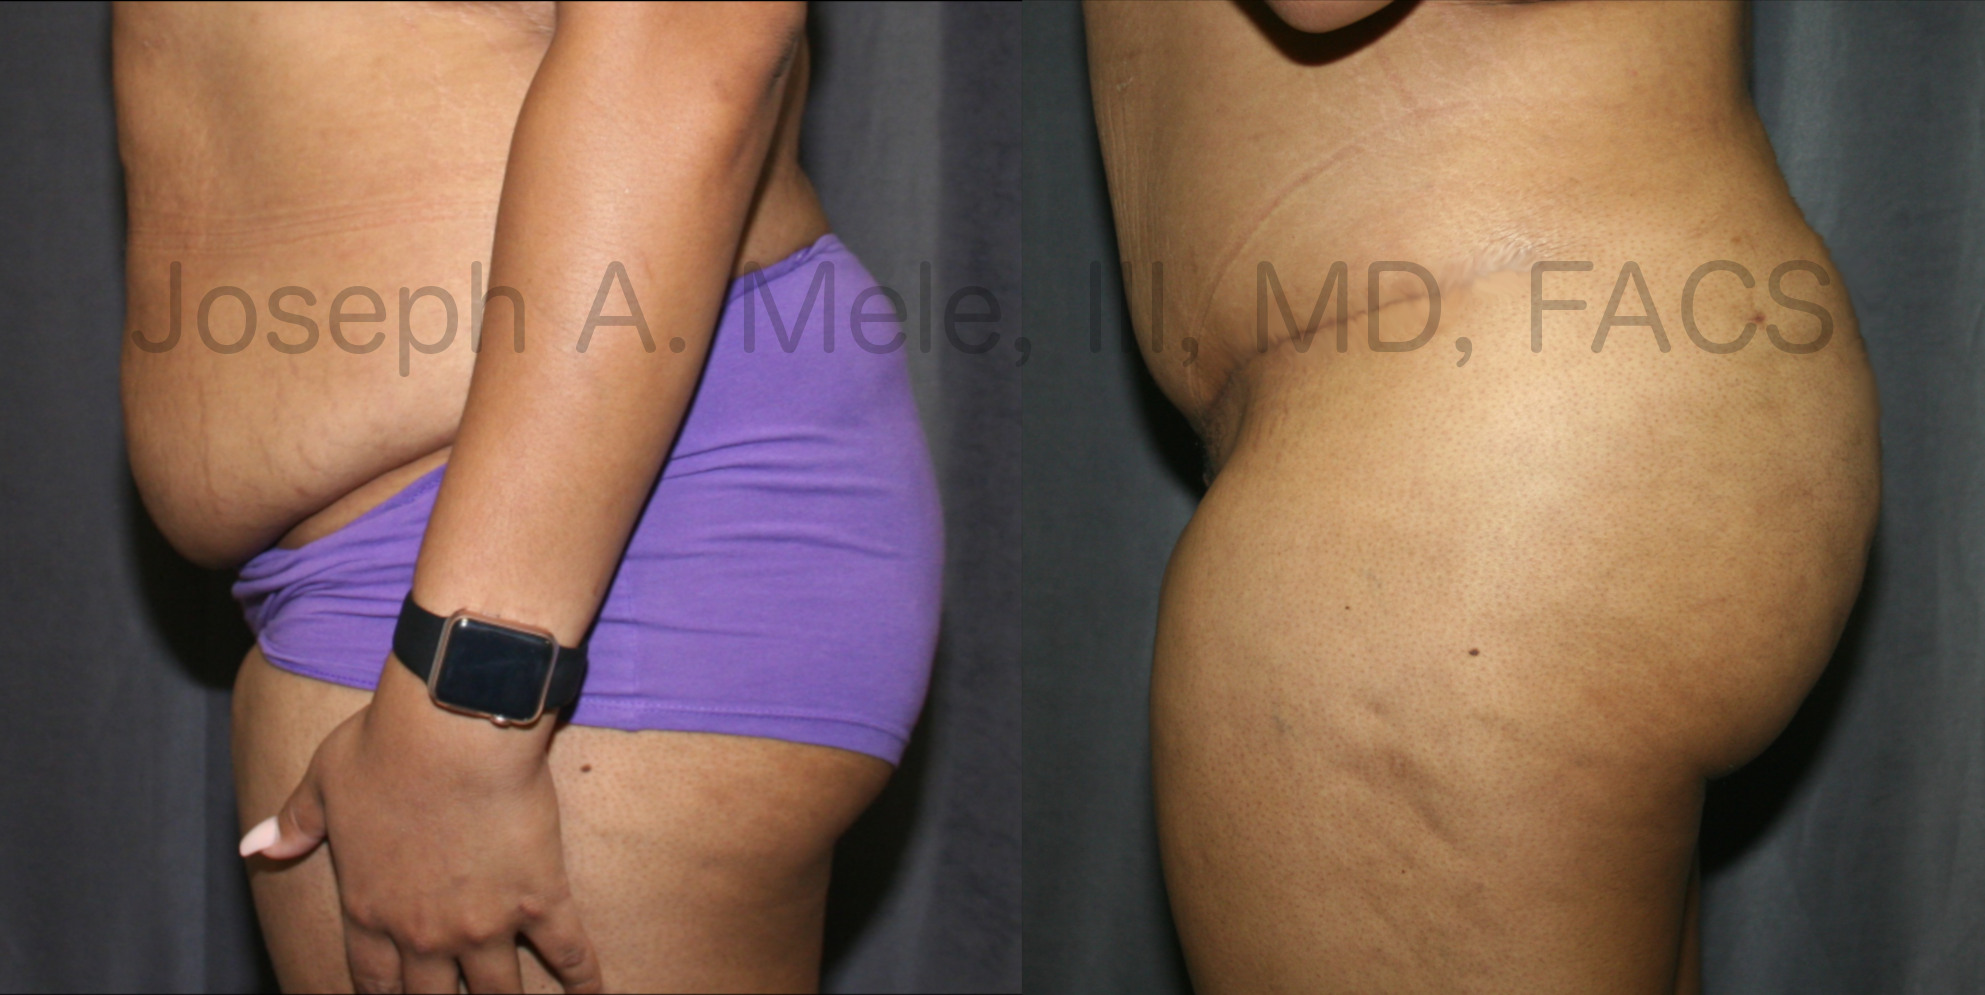 Brazilian Butt Lift with a Tummy Tuck before and after pictures. (BBL and Abdominoplasty)